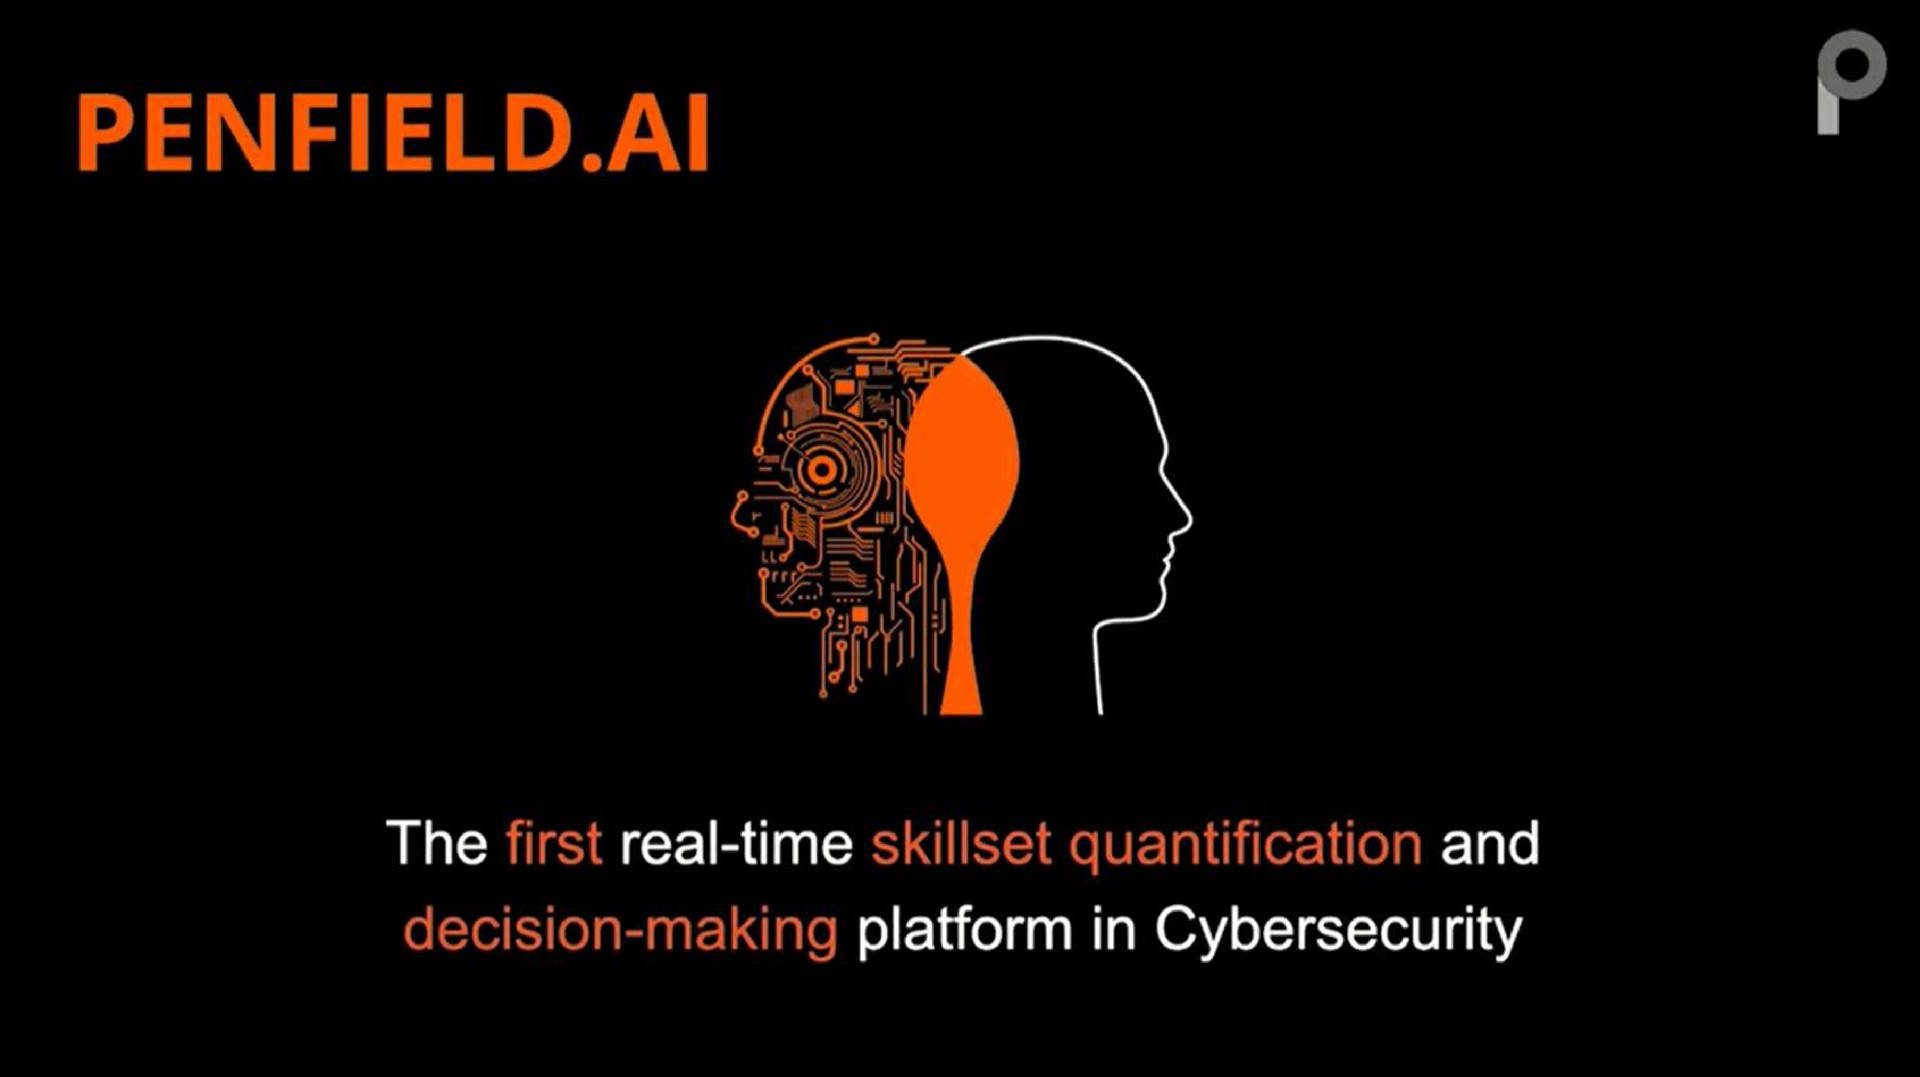 i ant the first real time quantification and decision making platform in | Penfield.ai